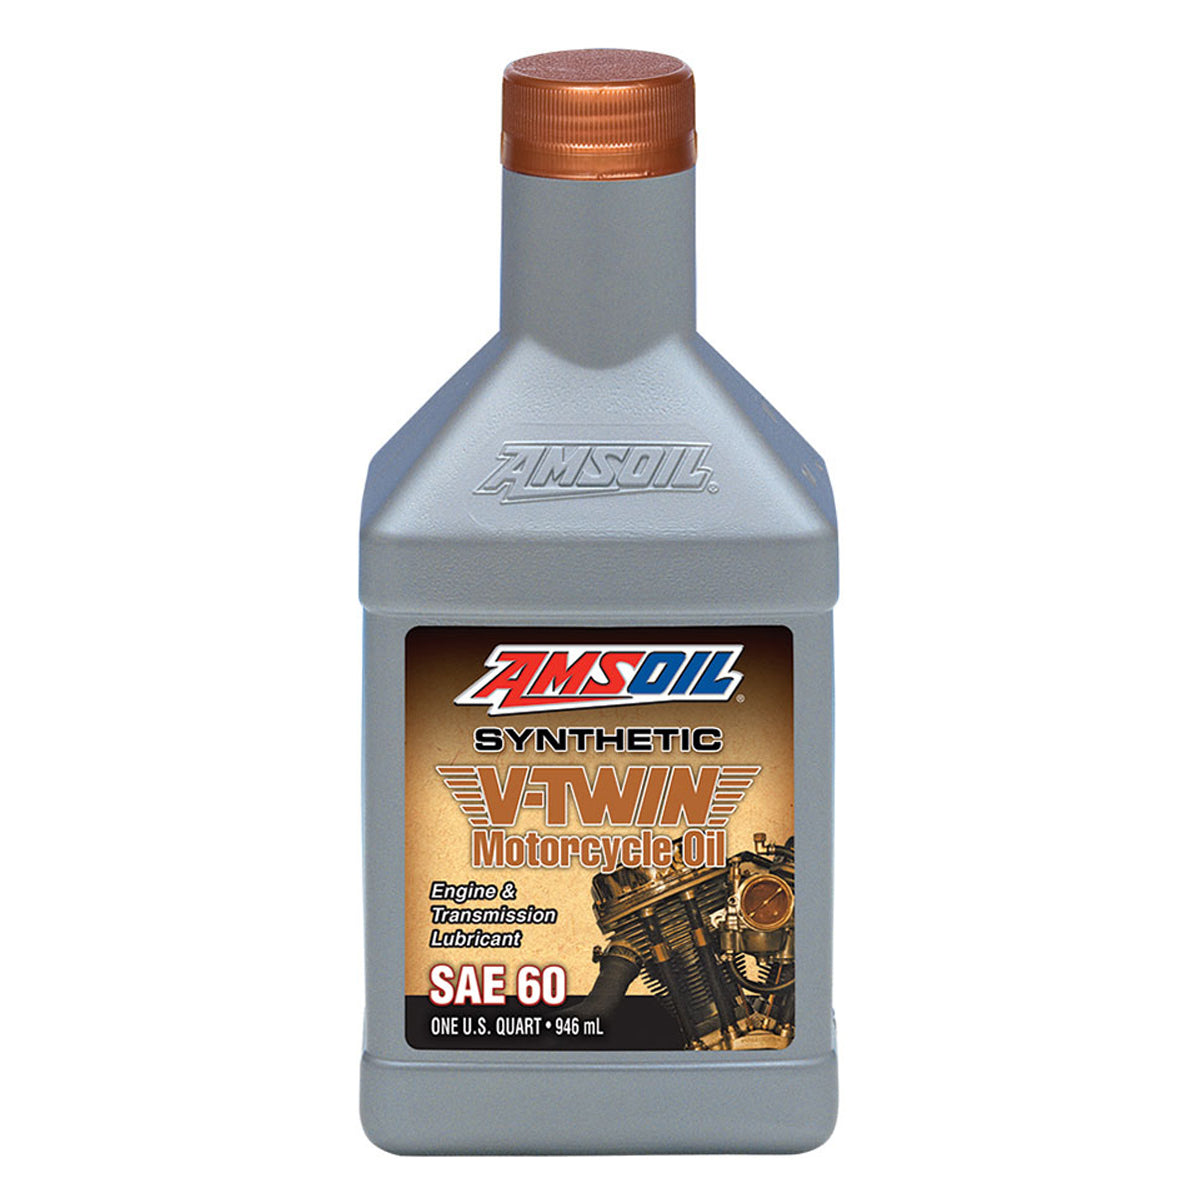 XAO MCSQT | V-TWIN SAE 60 SYNTHETIC MOTORCYCLE OIL  | 1 US QT